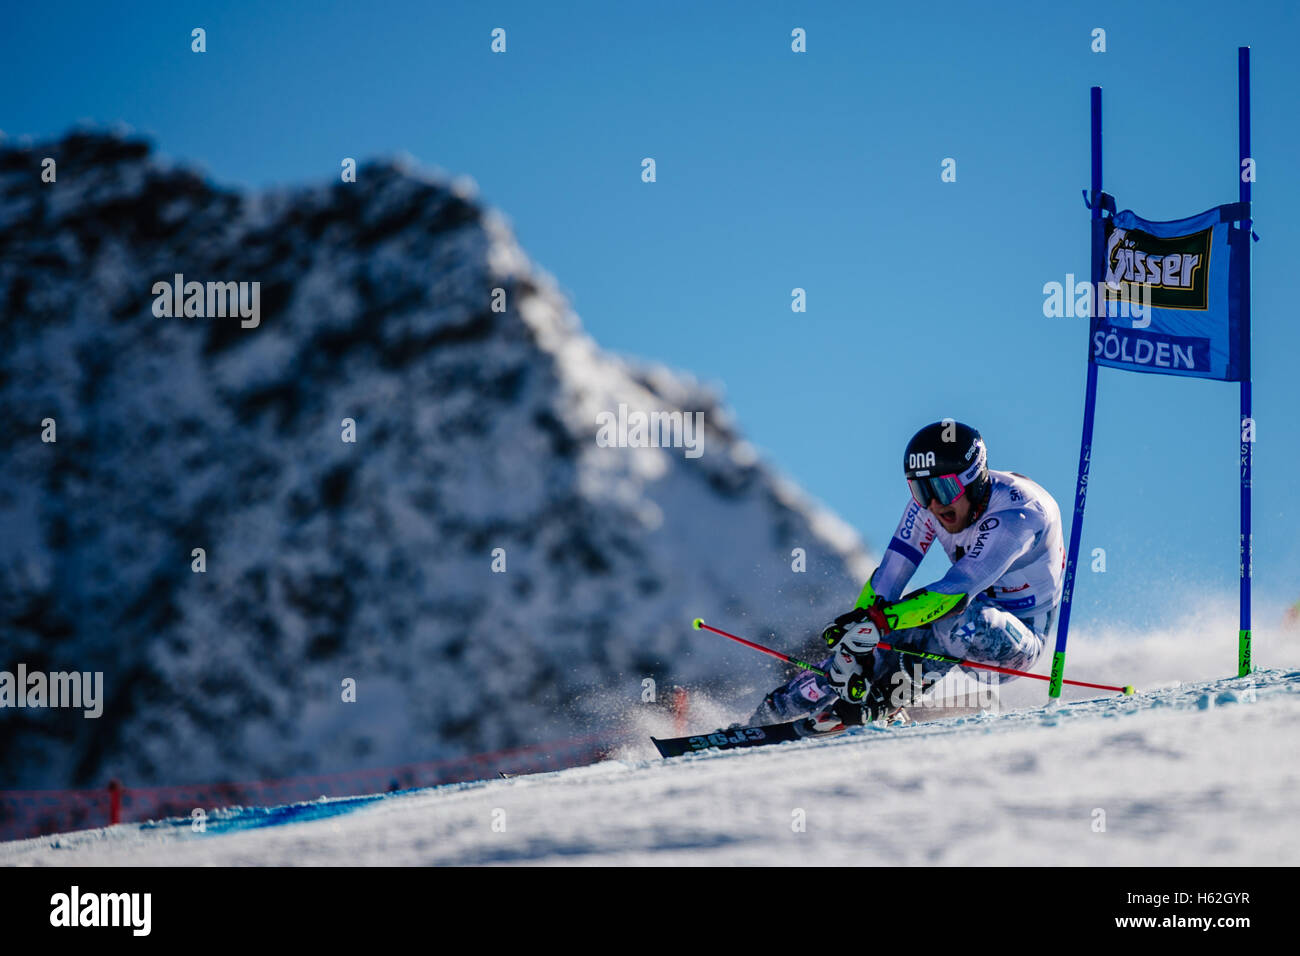 Solden, Austria. 23rd Oct, 2016. Eemeli Pirinen of Finland competes during the first run of the FIS World Cup Men's Giant Slalom race in Solden, Austria on October 23, 2016. Credit:  Jure Makovec/Alamy Live News Stock Photo